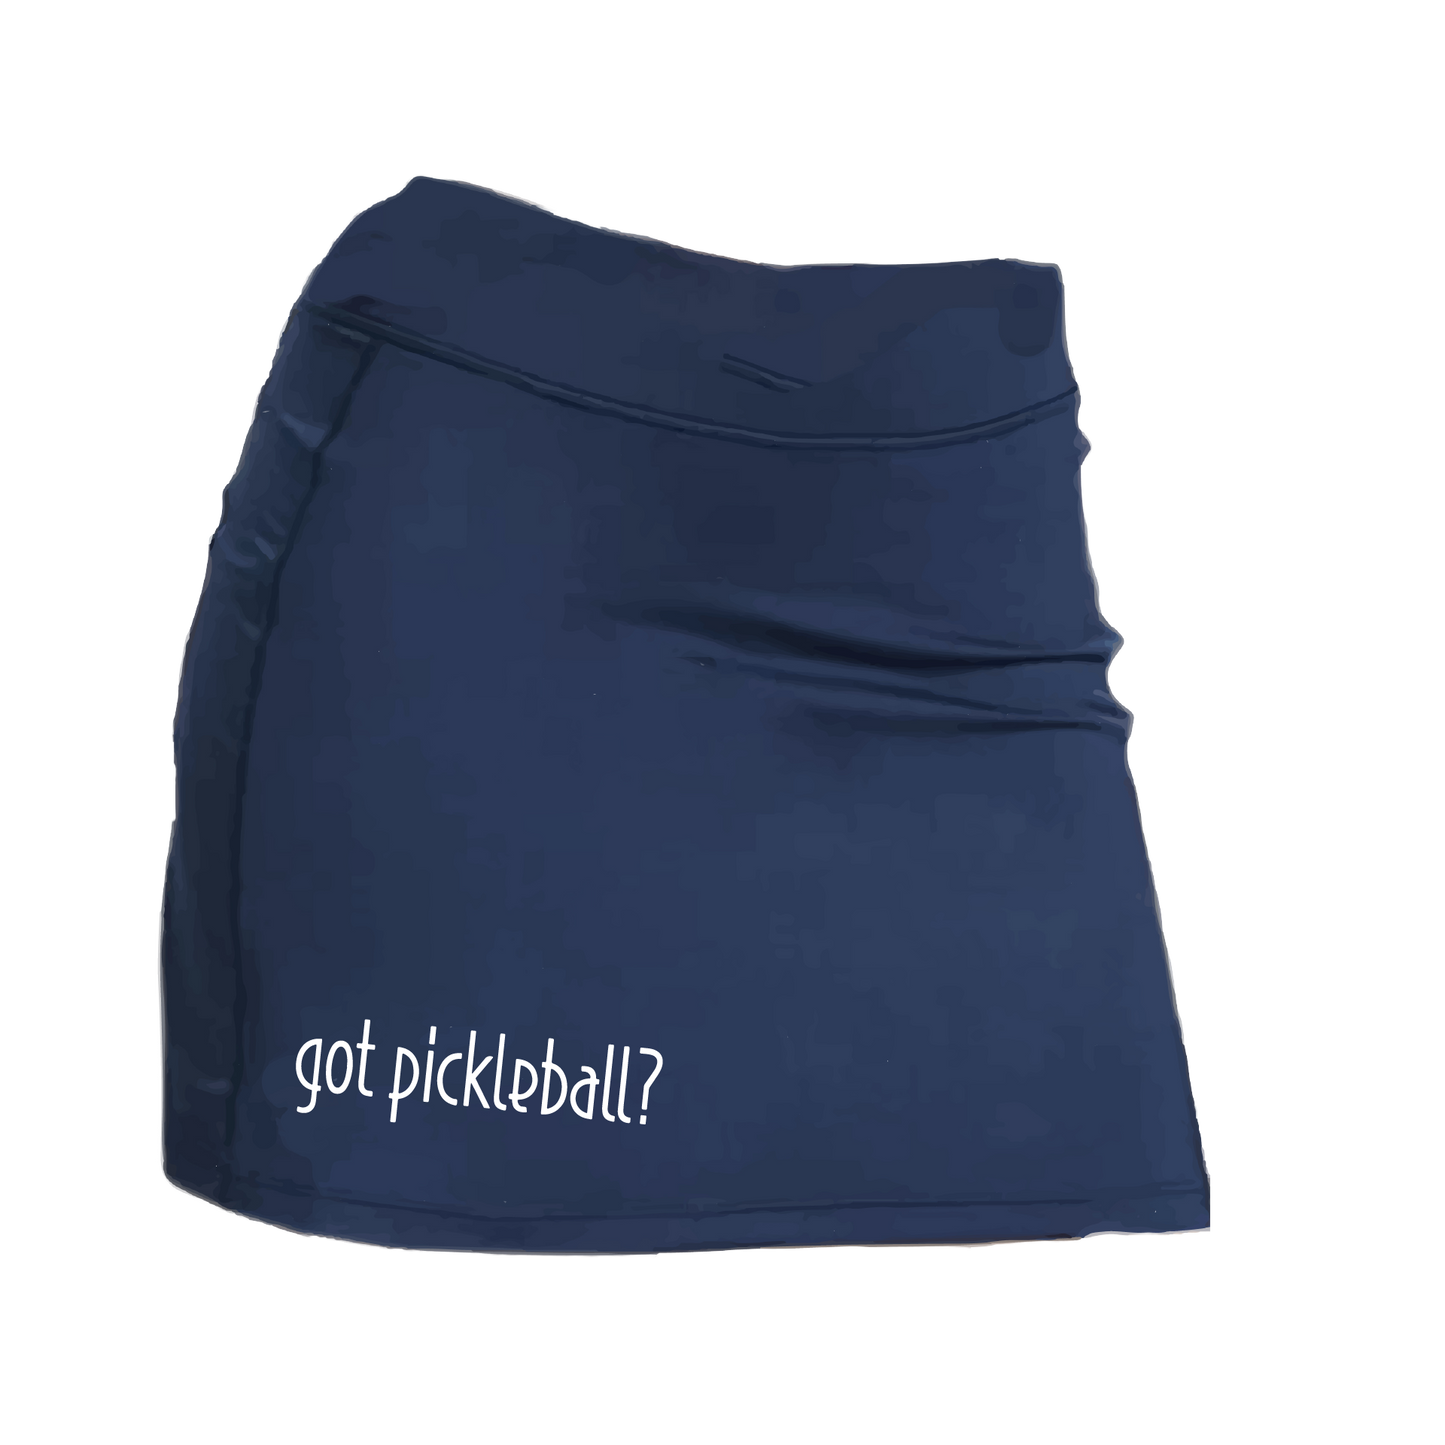 Skort Design: got pickleball? - Women’s core active jersey-knit skort comes with built-in shorts made out of a poly-spandex blend.  Feel secure knowing that no matter how strenuous the exercise, the skort will remain in place (it won’t ride up!). The fabric is breathable, featuring Dri-Works wicking technology. As you perspire, it allows your skin to breathe while simultaneously absorbing the moisture, keeping you dry and comfortable.